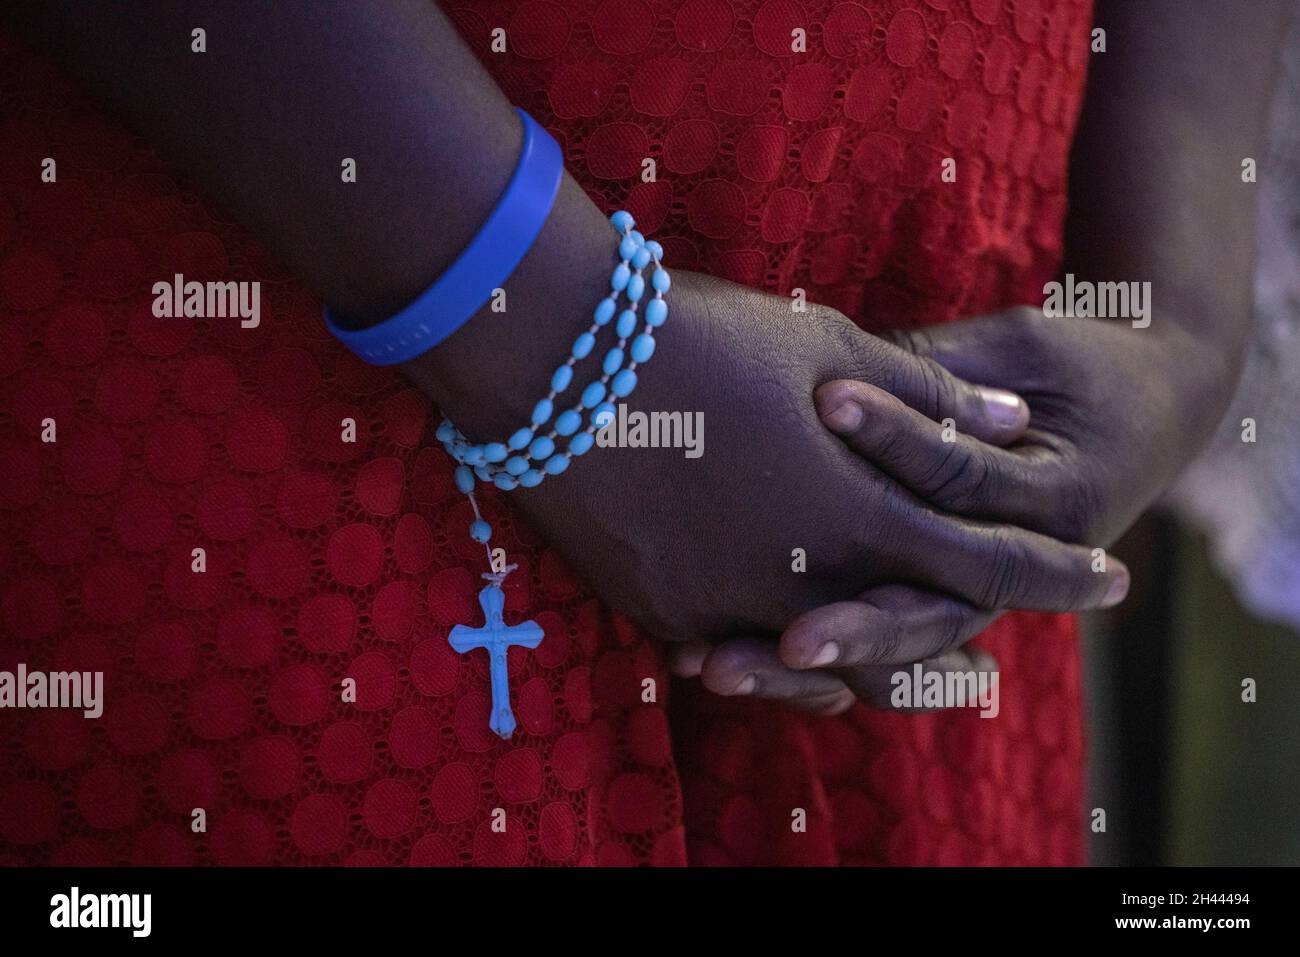 A rosary hangs from the wrist of a worshipper as she takes part in Sunday Catholic Mass at the Chapelle de l'Immaculee Conception de l'HUEH in Port-au-Prince, Haiti October 31, 2021. REUTERS/Adrees Latif Stock Photo